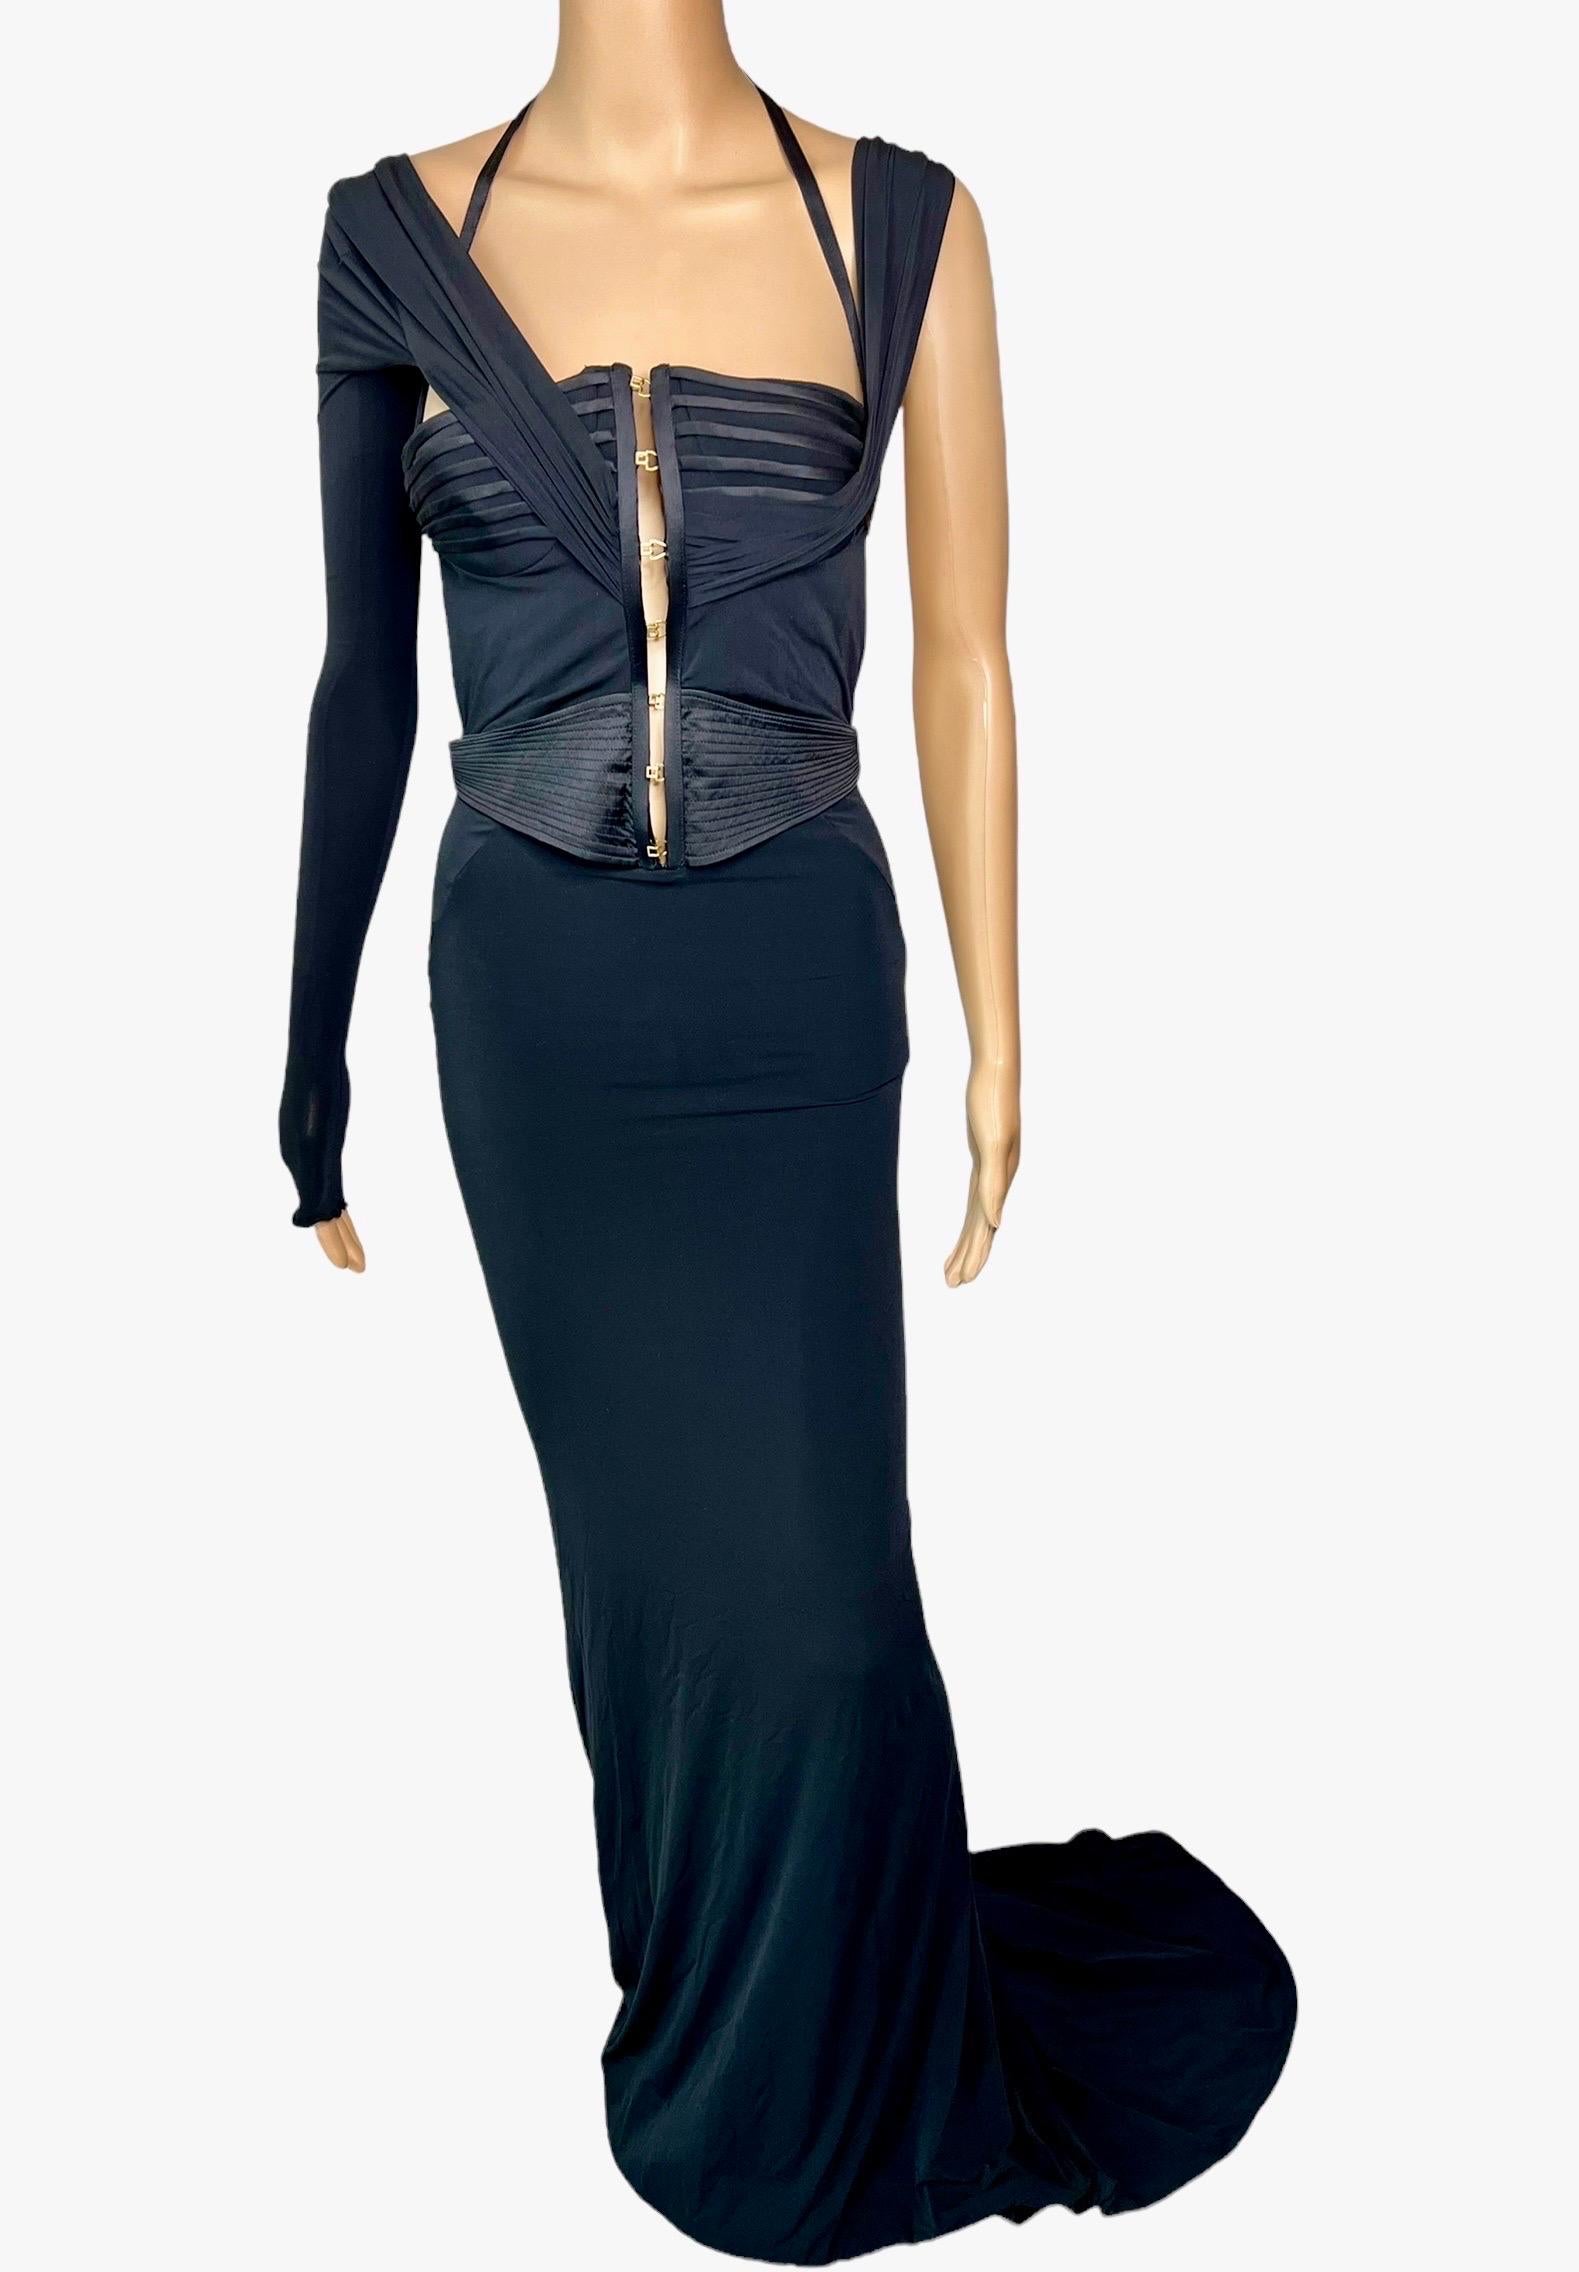 Tom Ford for Gucci F/W 2003 Bustier Corset Cutout One Sleeve Train Black Evening Dress Gown IT 42



